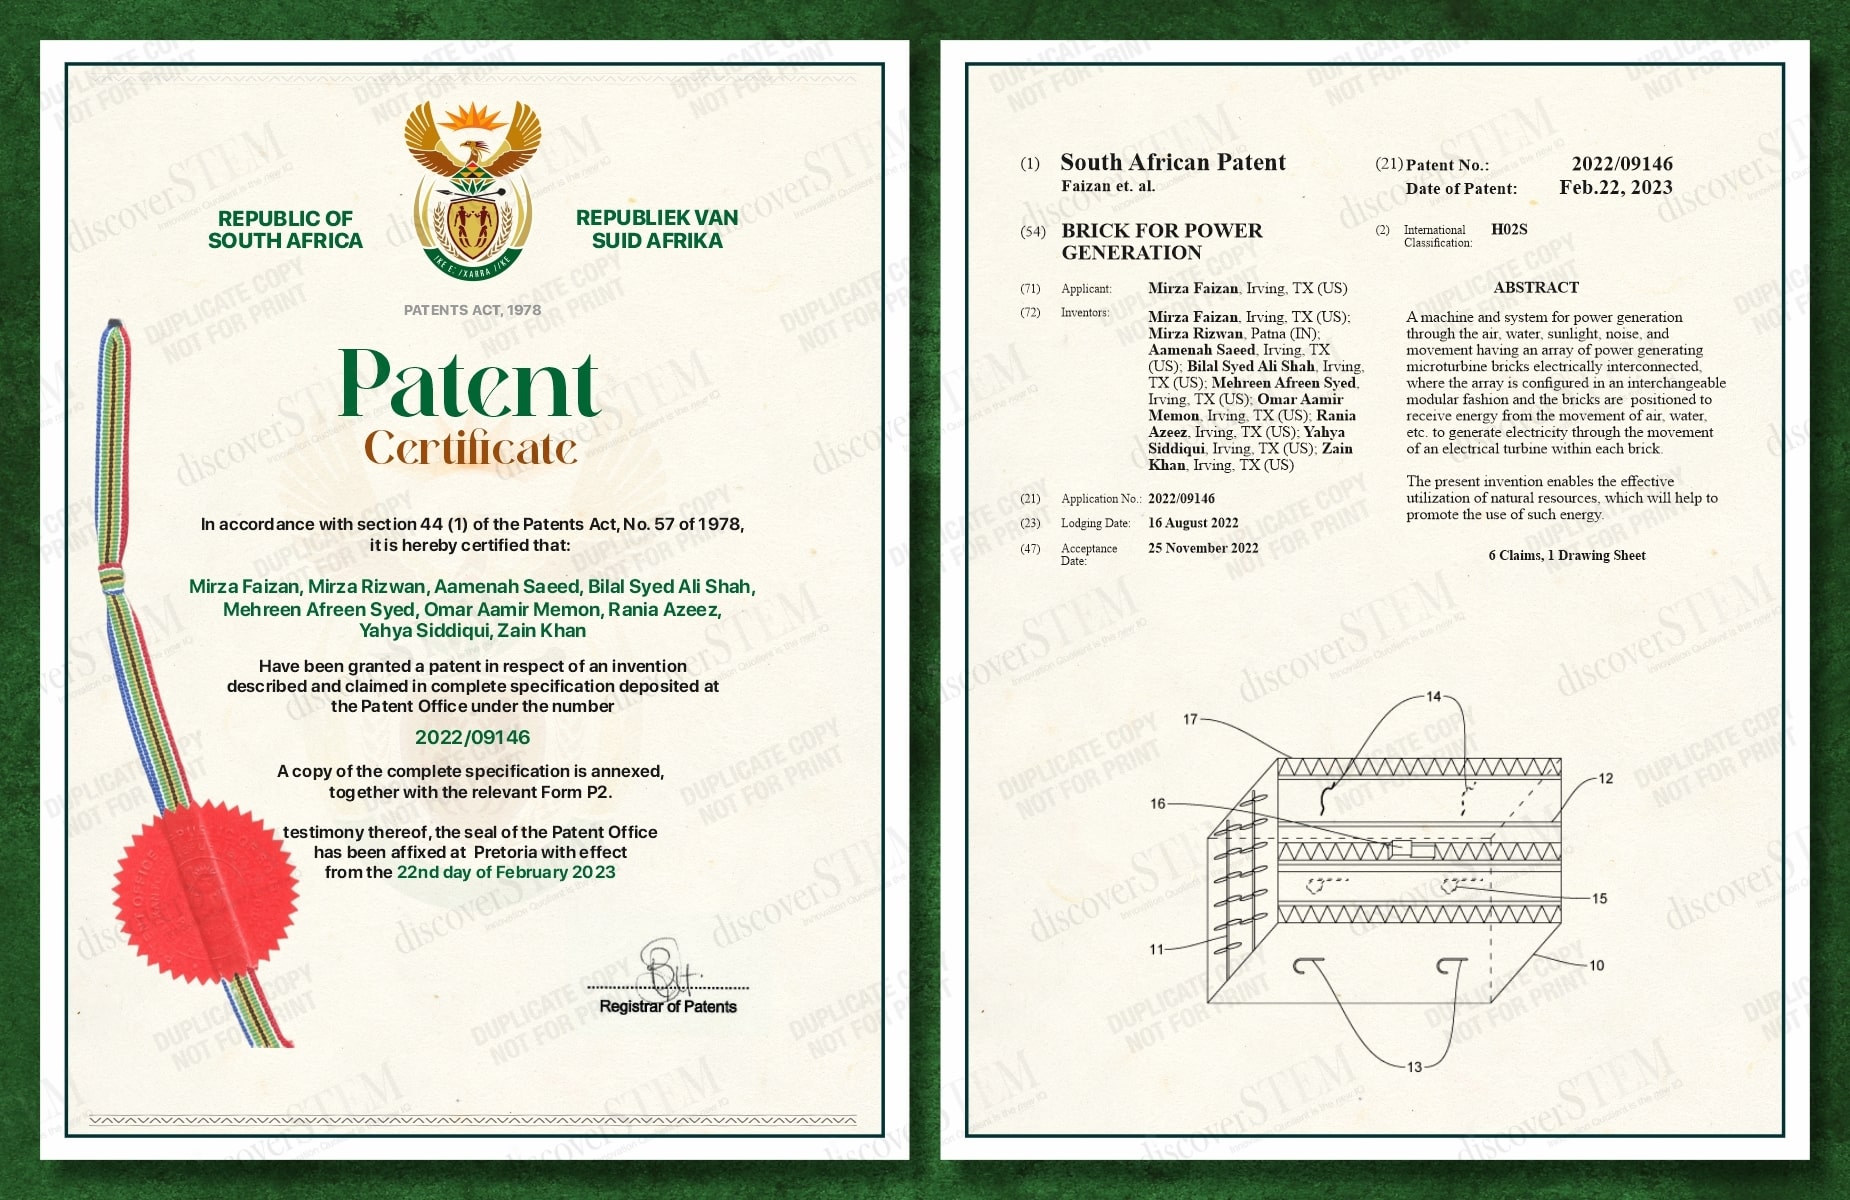 SA Patent Certificate: Brick for power generation [2022/09146]